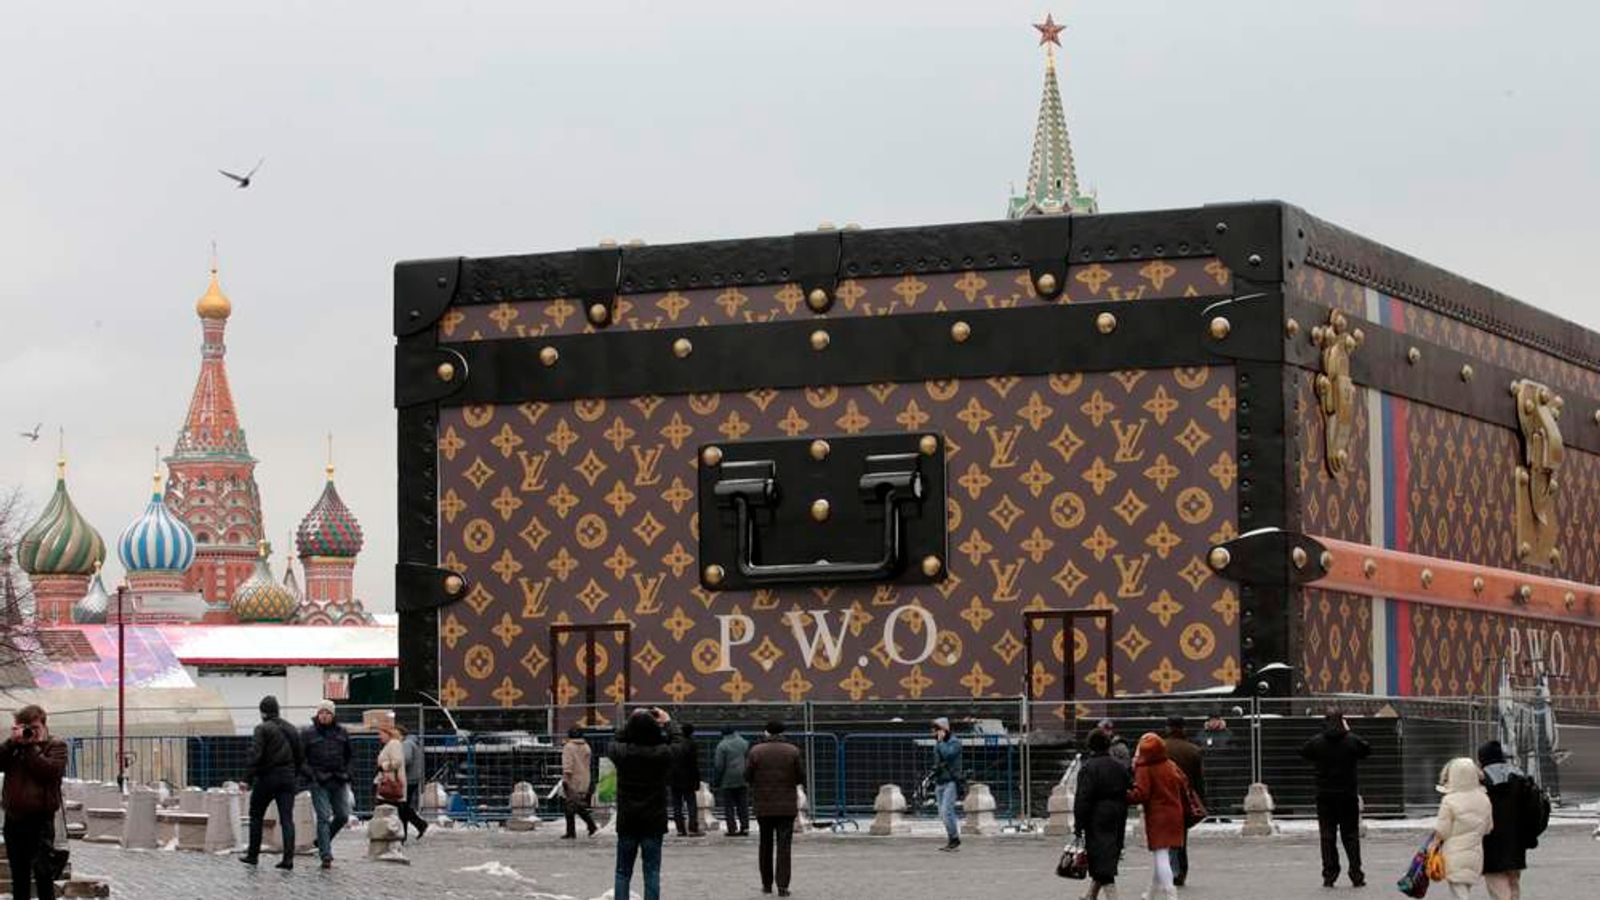 City of Paris orders removal of Louis Vuitton logo from giant